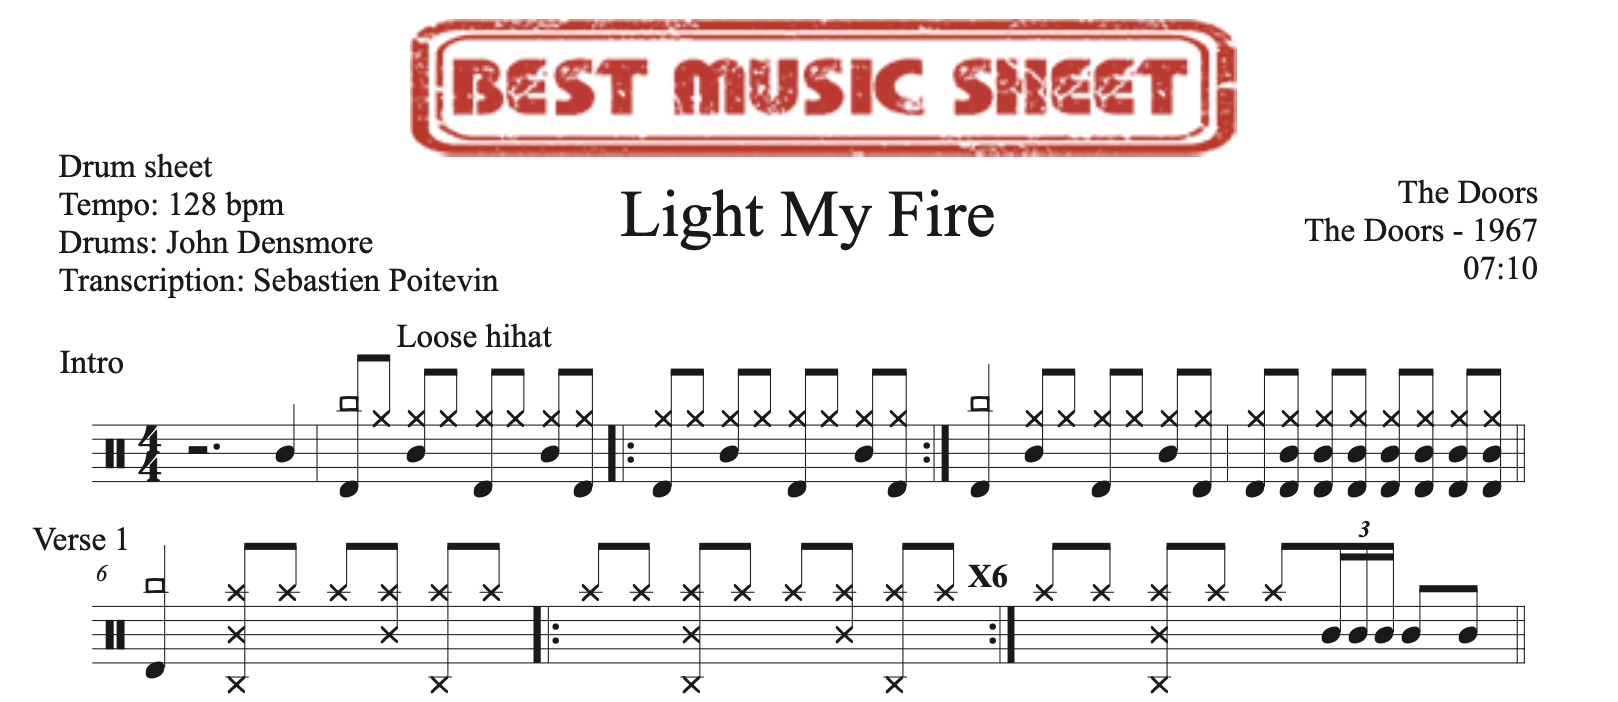 Sample drum sheet of Light My Fire by the Doors